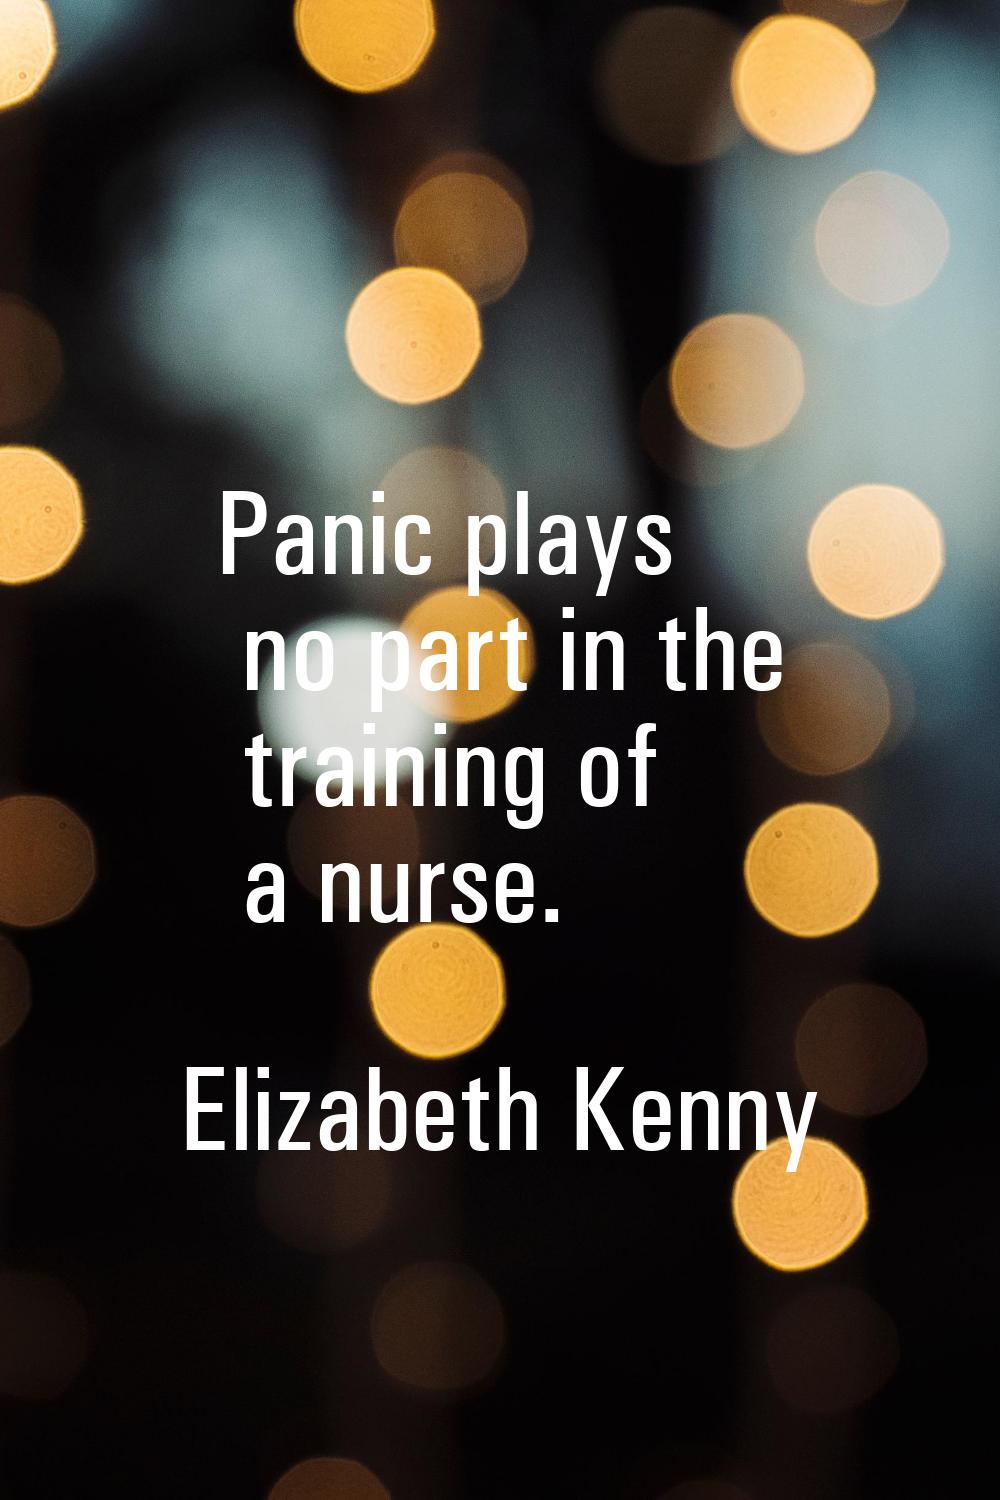 Panic plays no part in the training of a nurse.